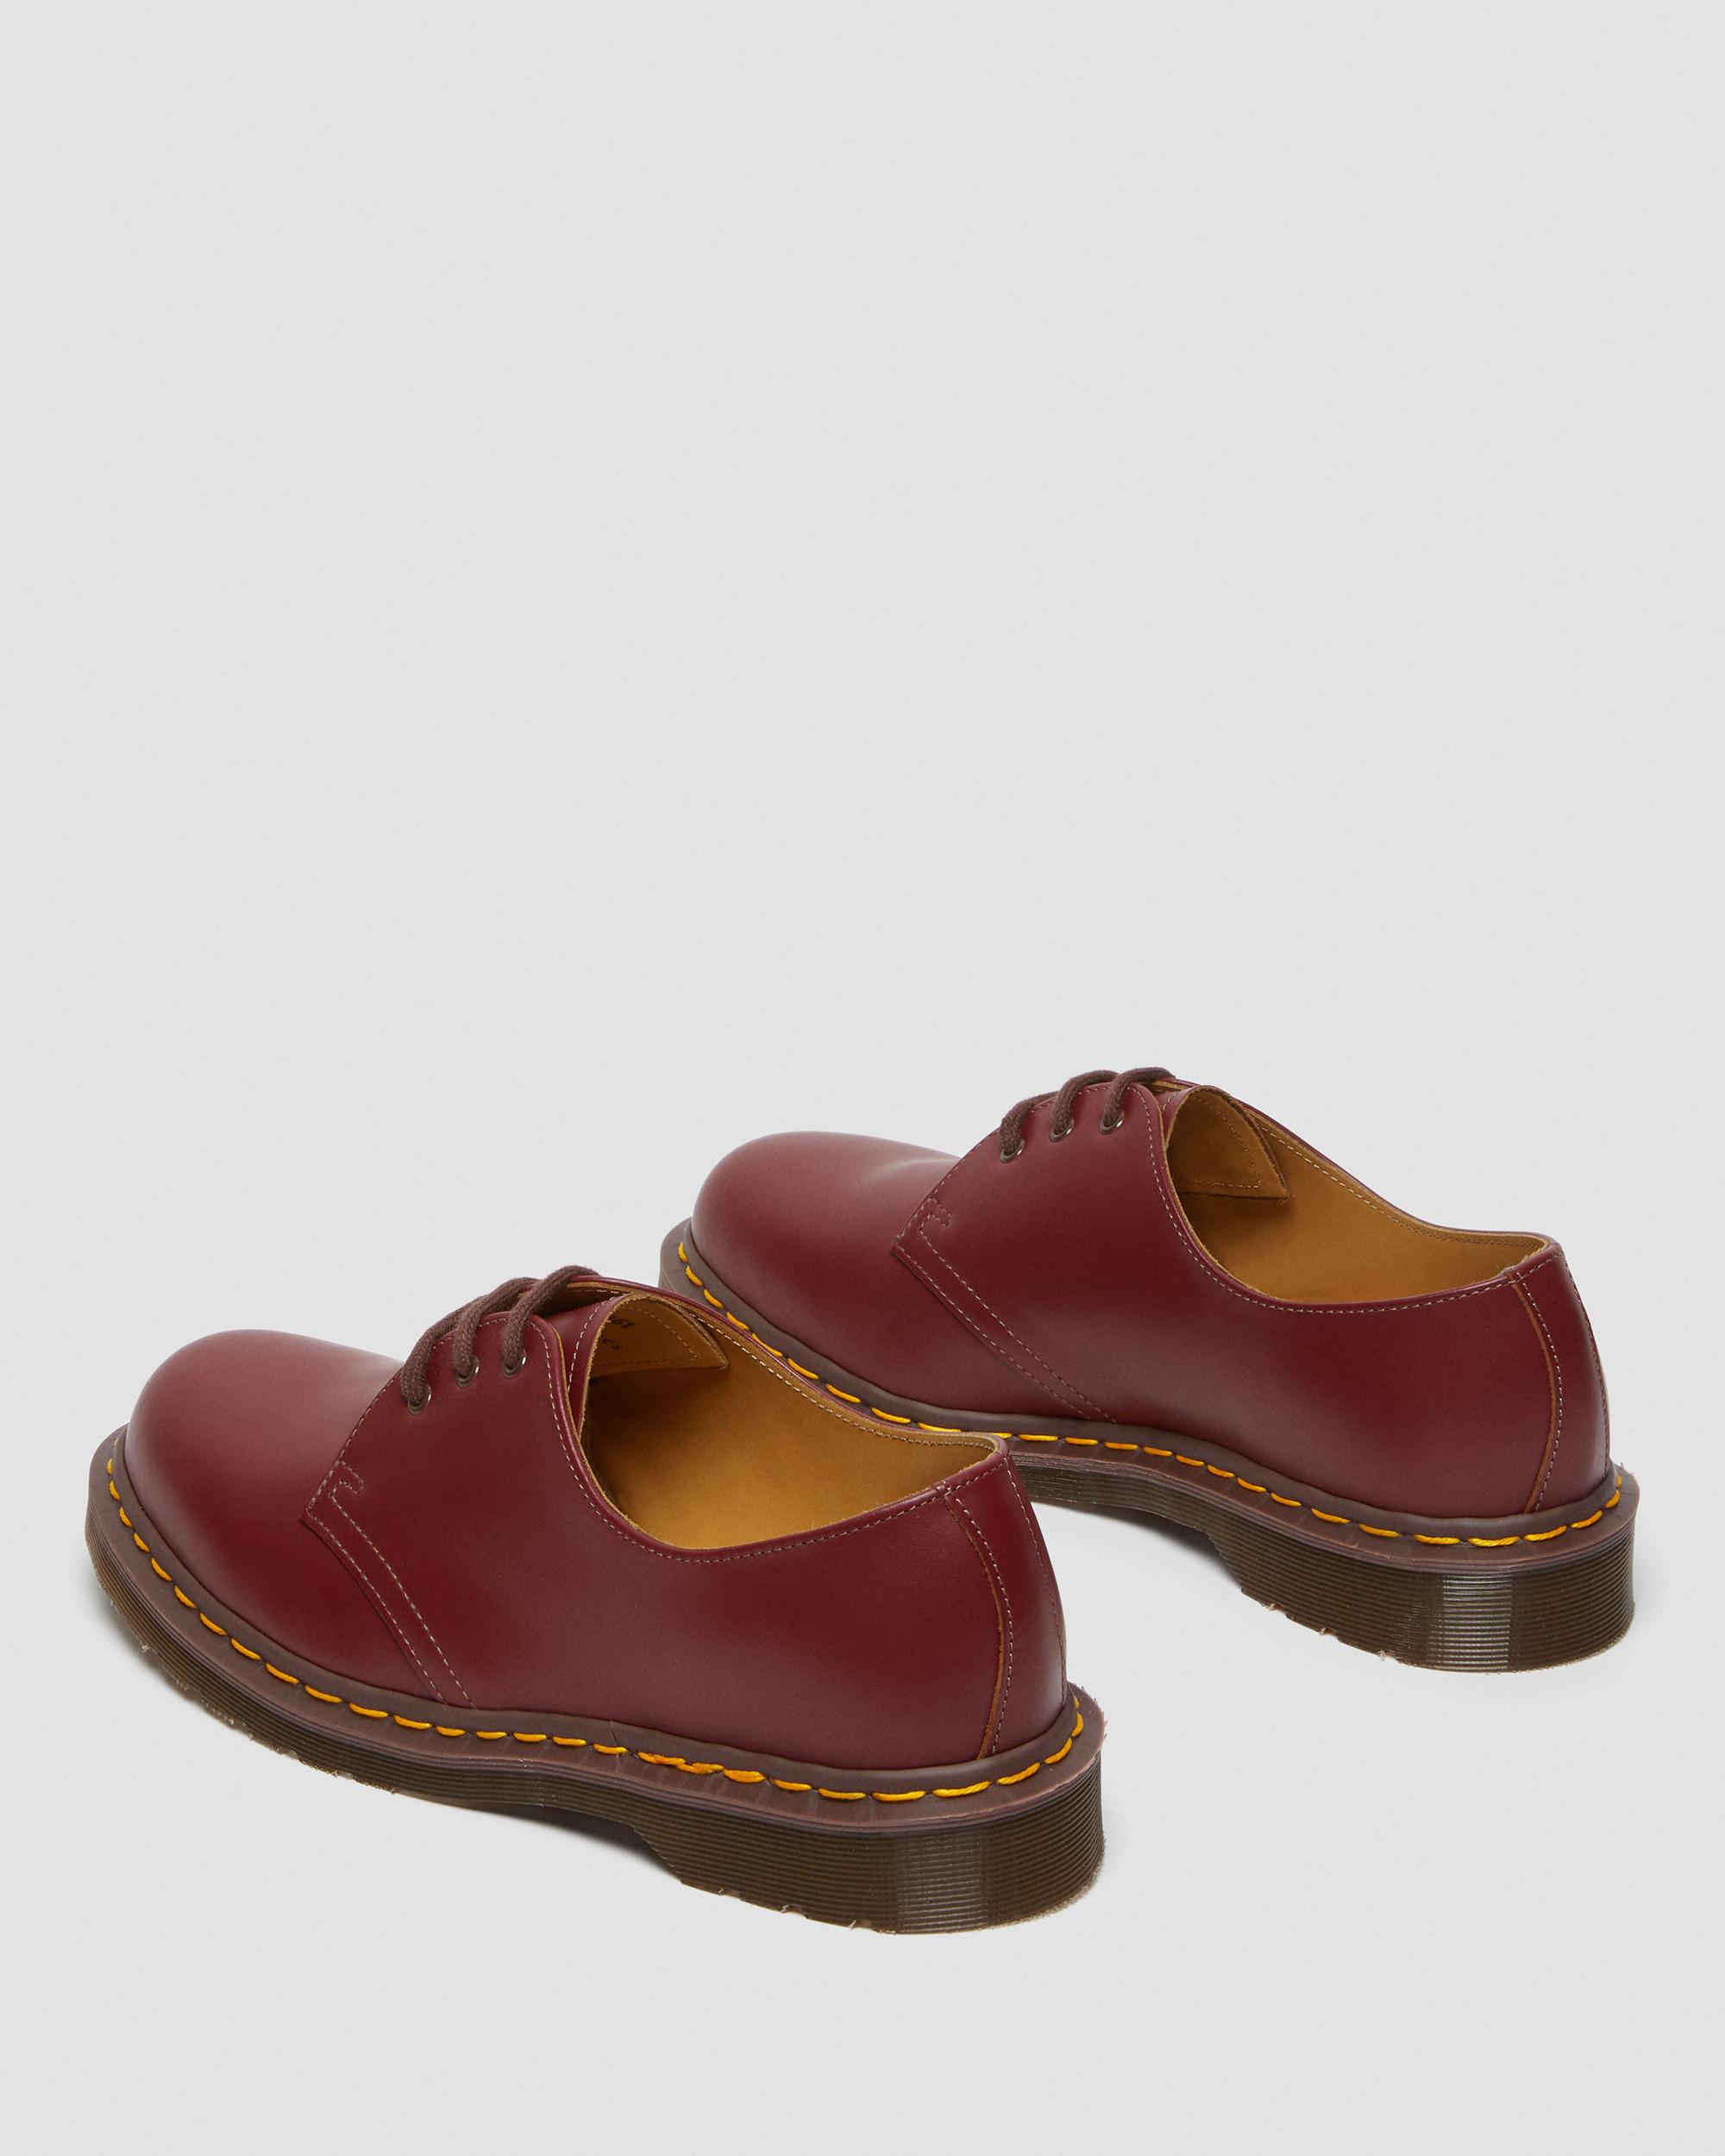 Vintage Made in England Oxford Shoes | Dr. Martens